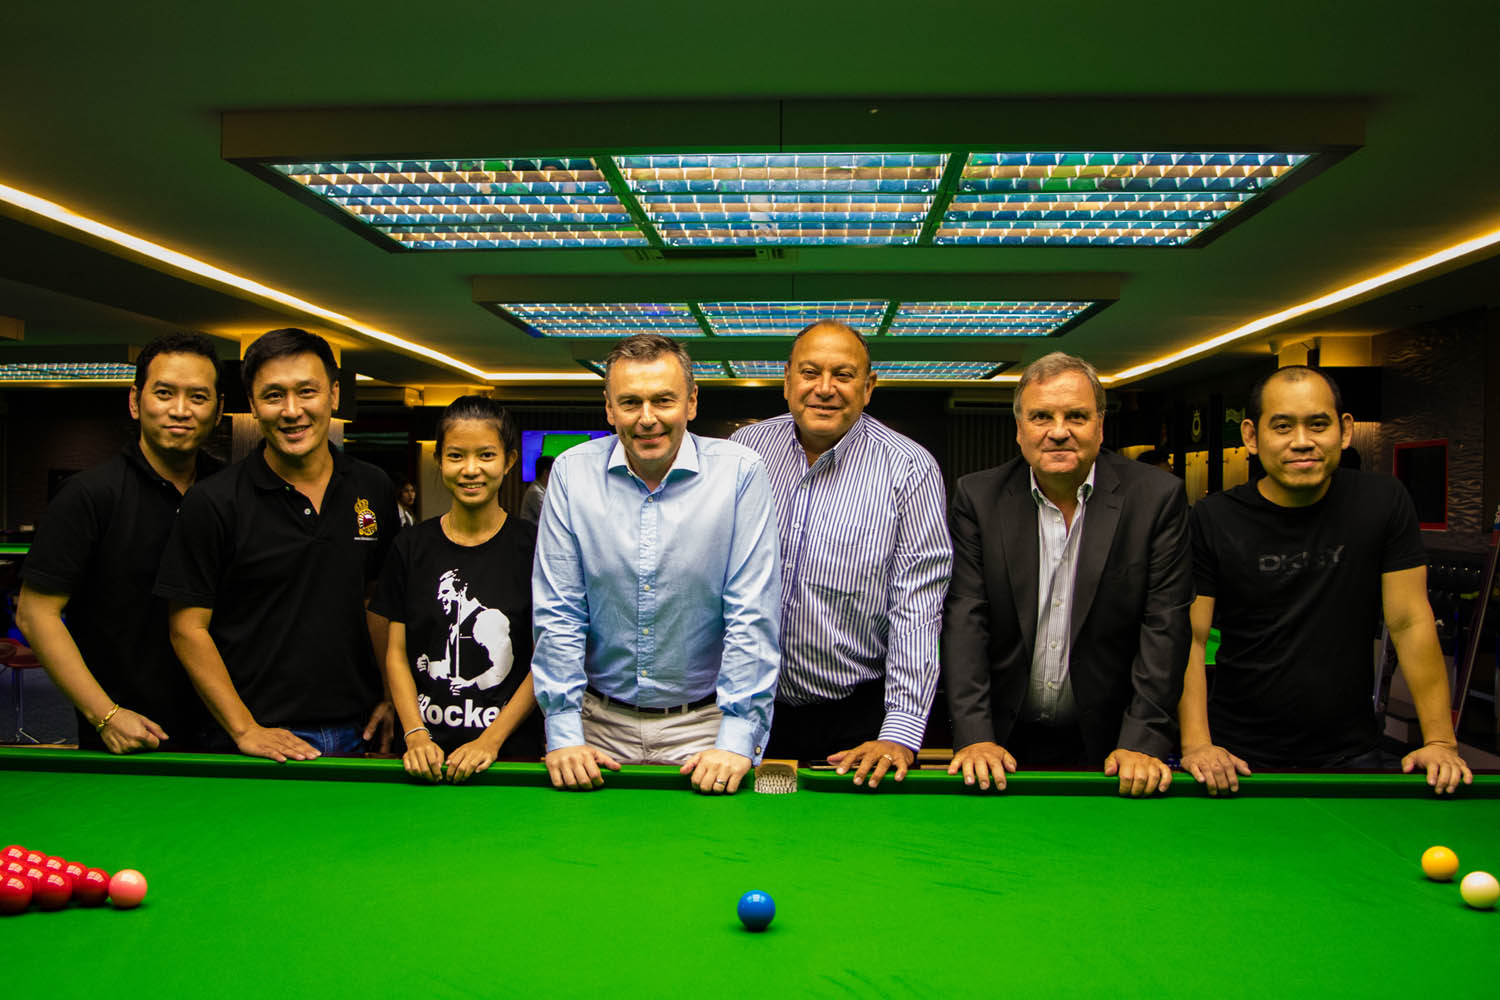 Top Class Snooker Facilities on the Rise